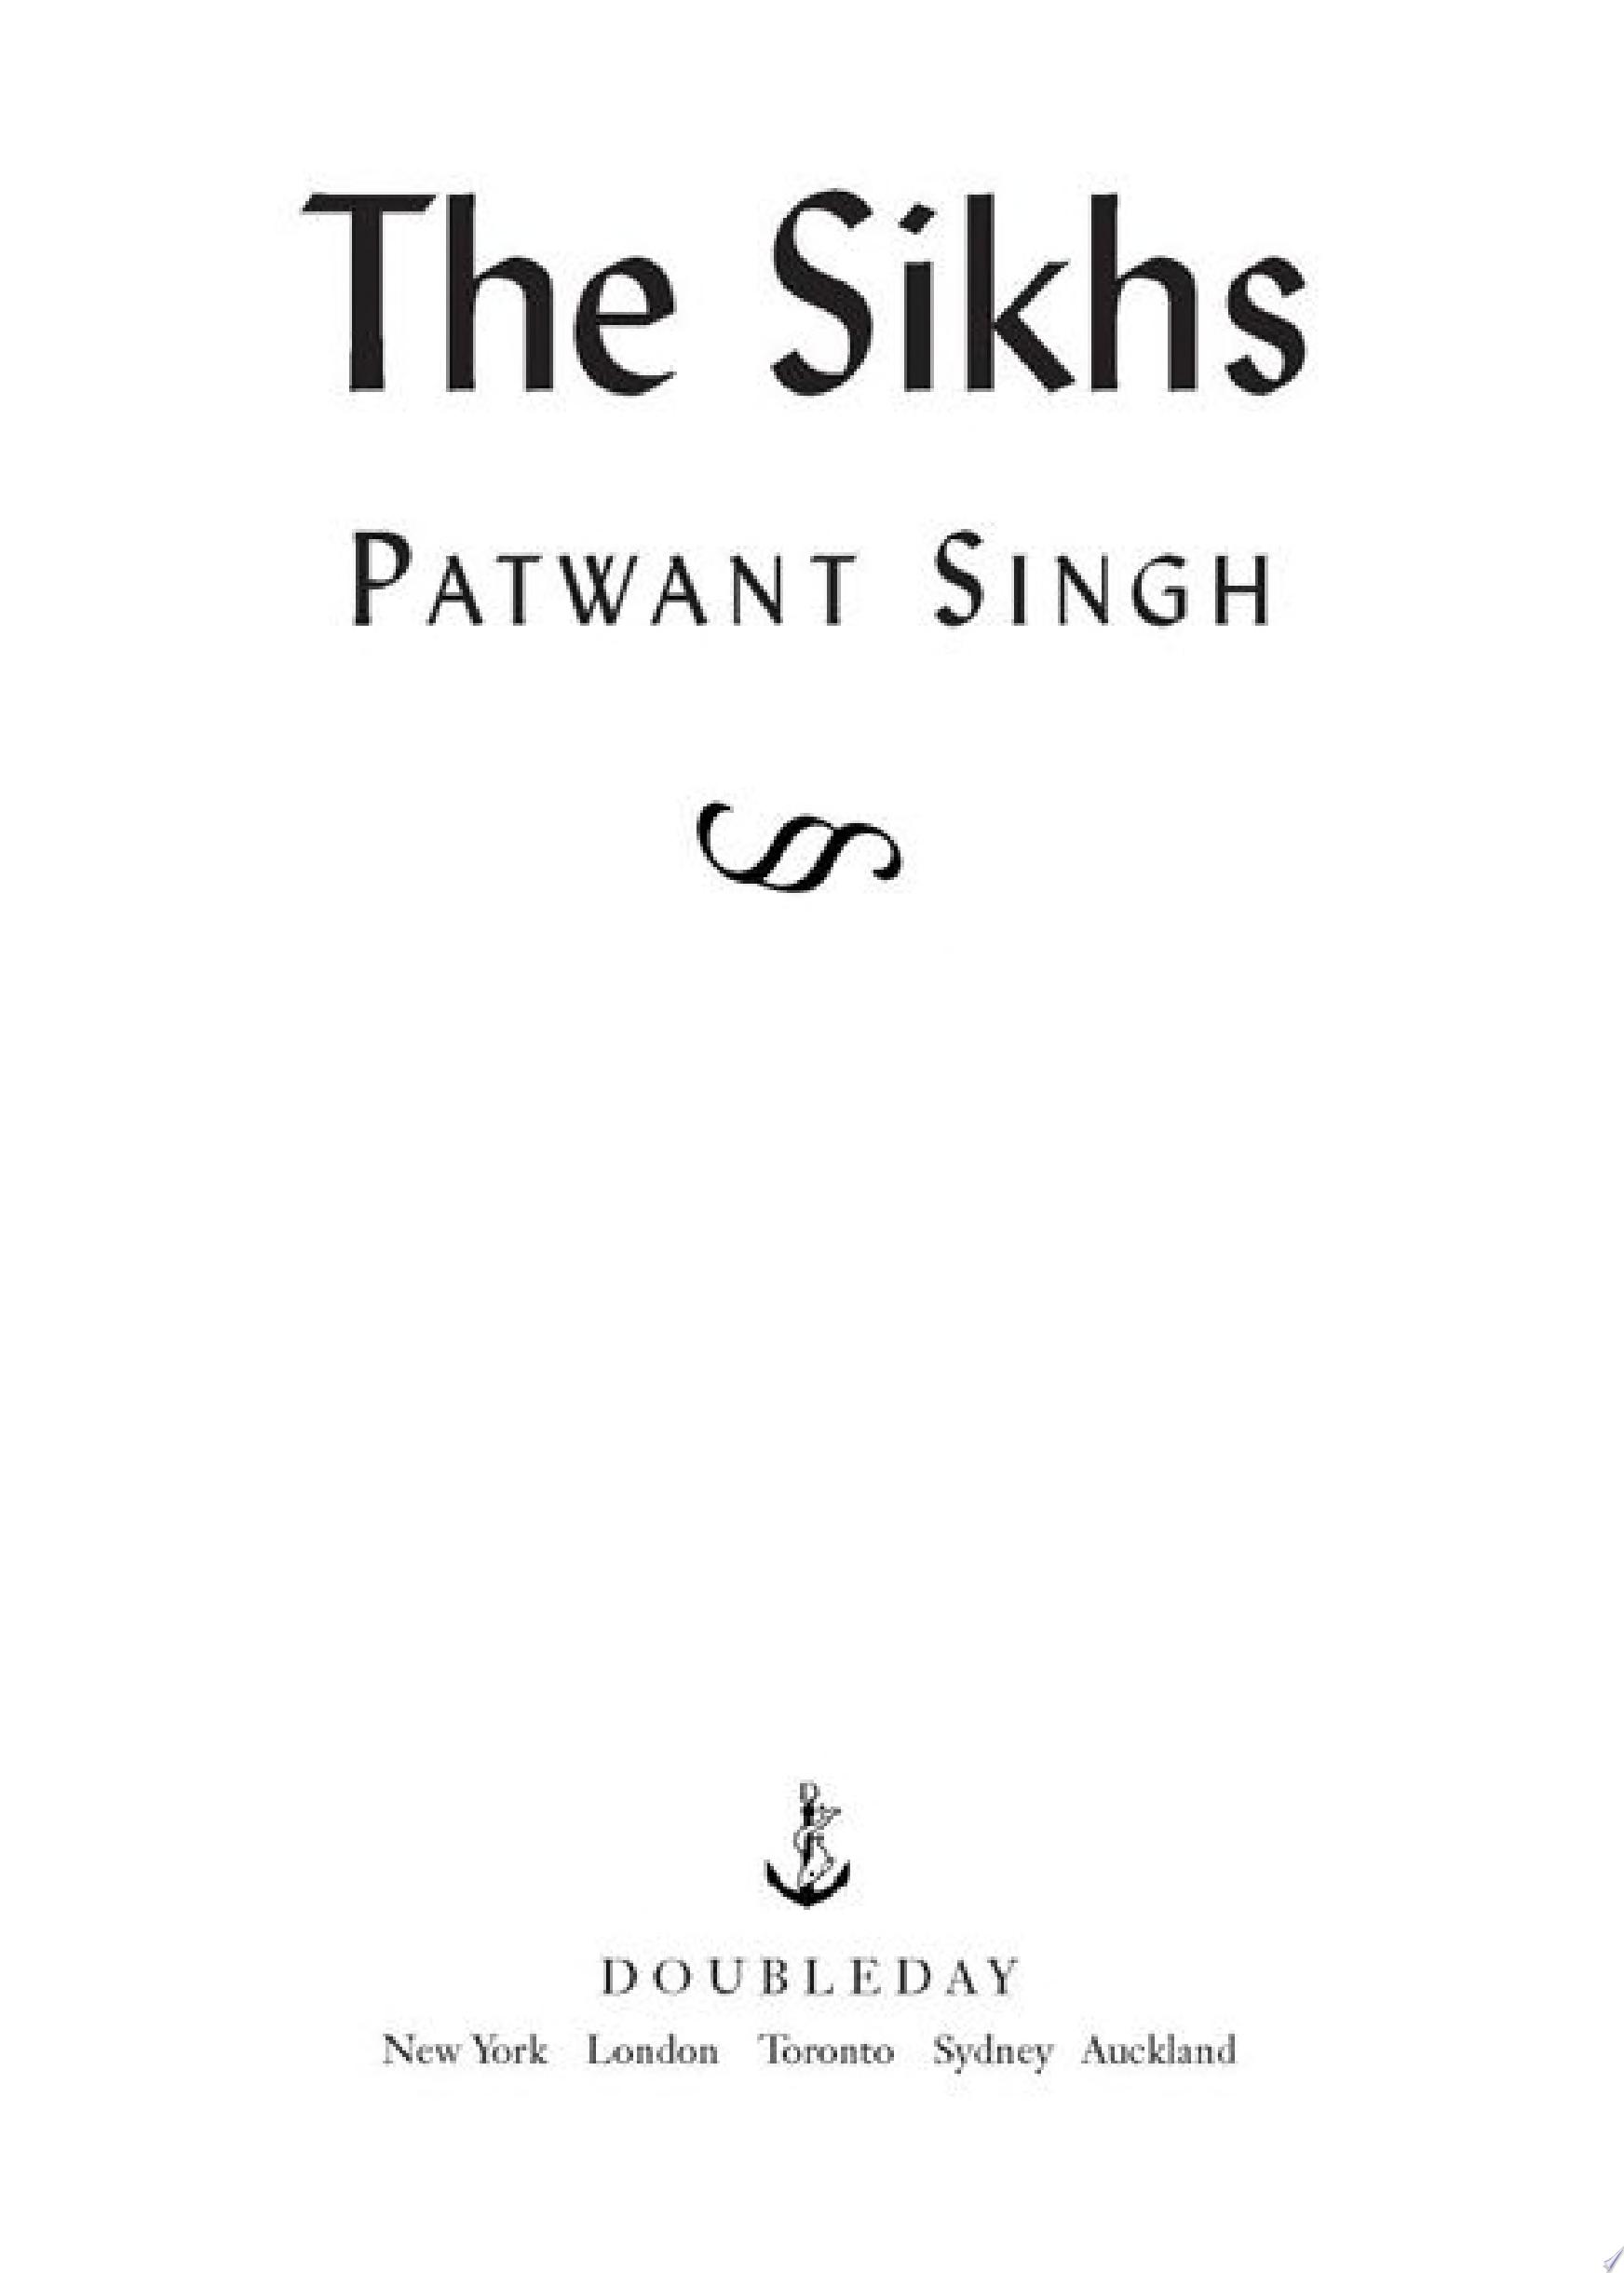 Image for "The Sikhs"